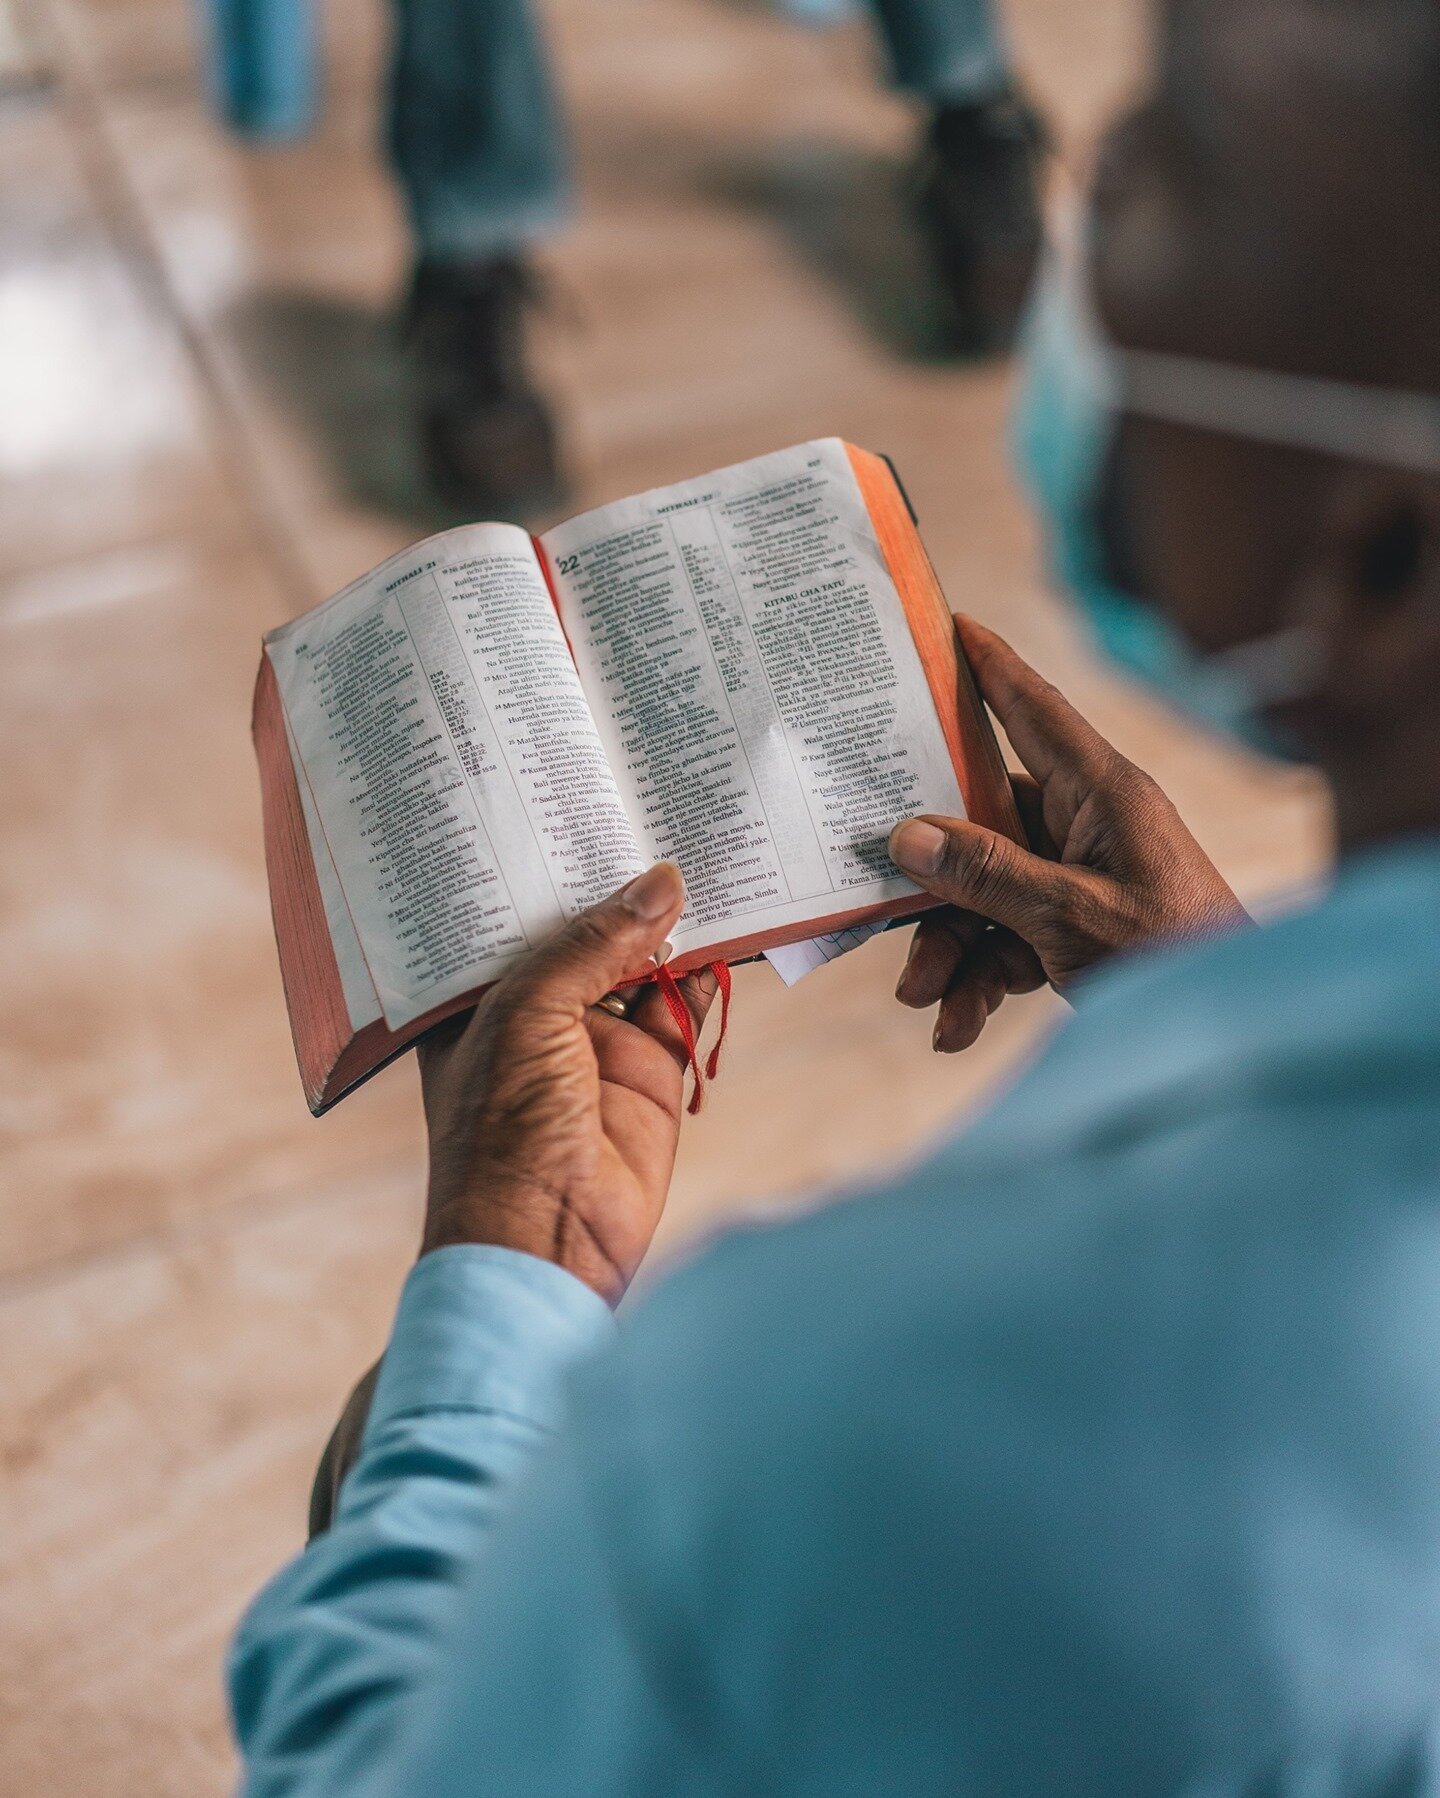 Did you know that every CARE for AIDS client receives their very own Bible? Working with partners like @vom_usa, we provide a copy of the Bible in every client's preferred language within the first few months of their program. For many of our clients